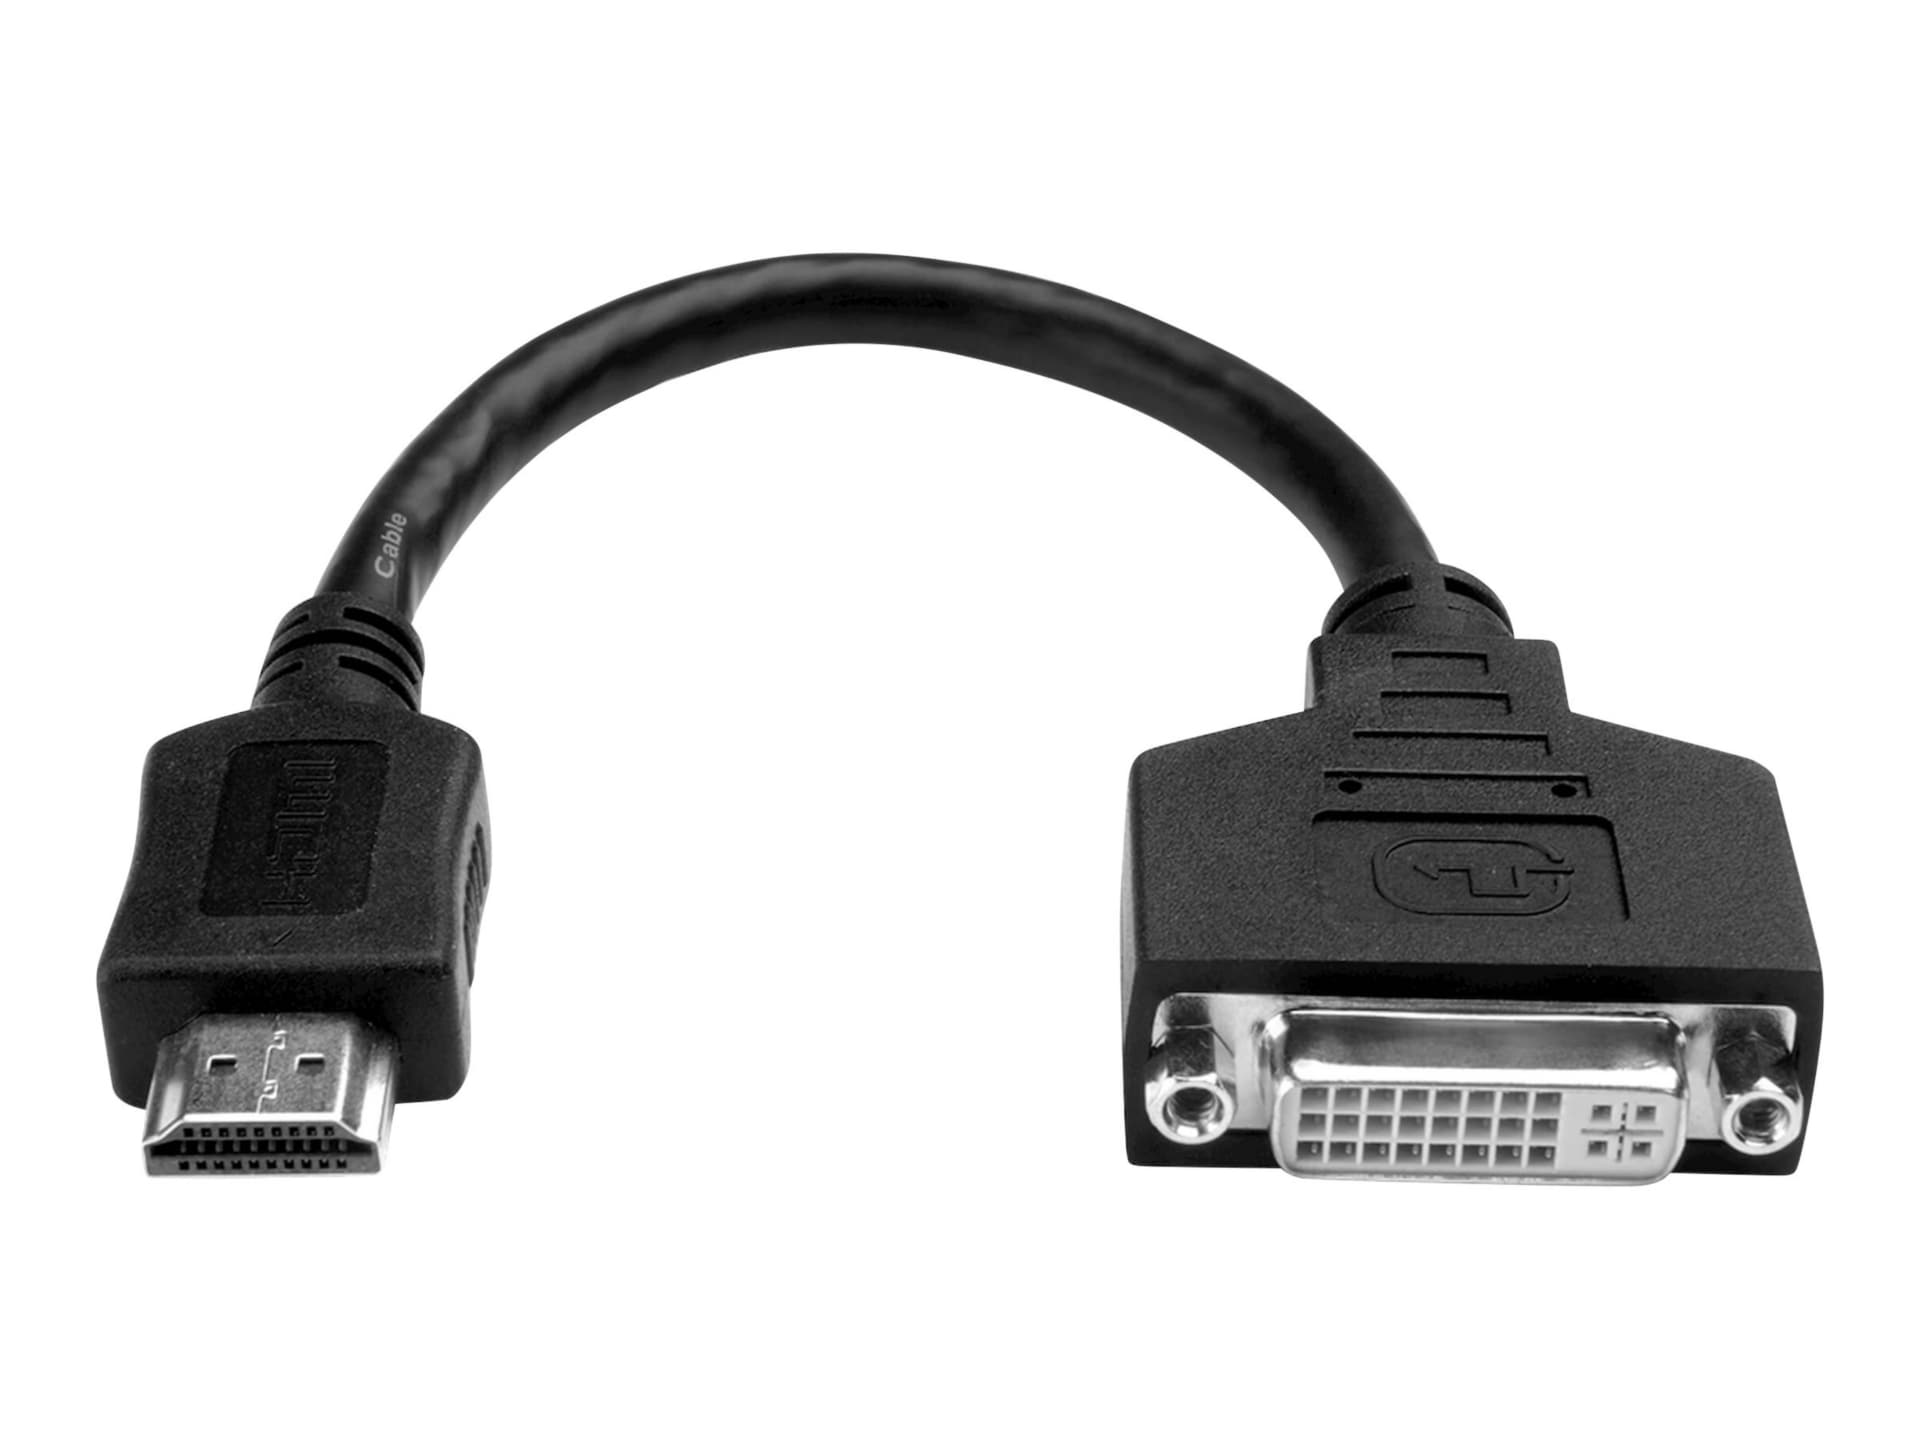 HDMI to DVI Adapter HDMI to DVI Cable by Insten HDMI to DVI Adapter Cable  6ft